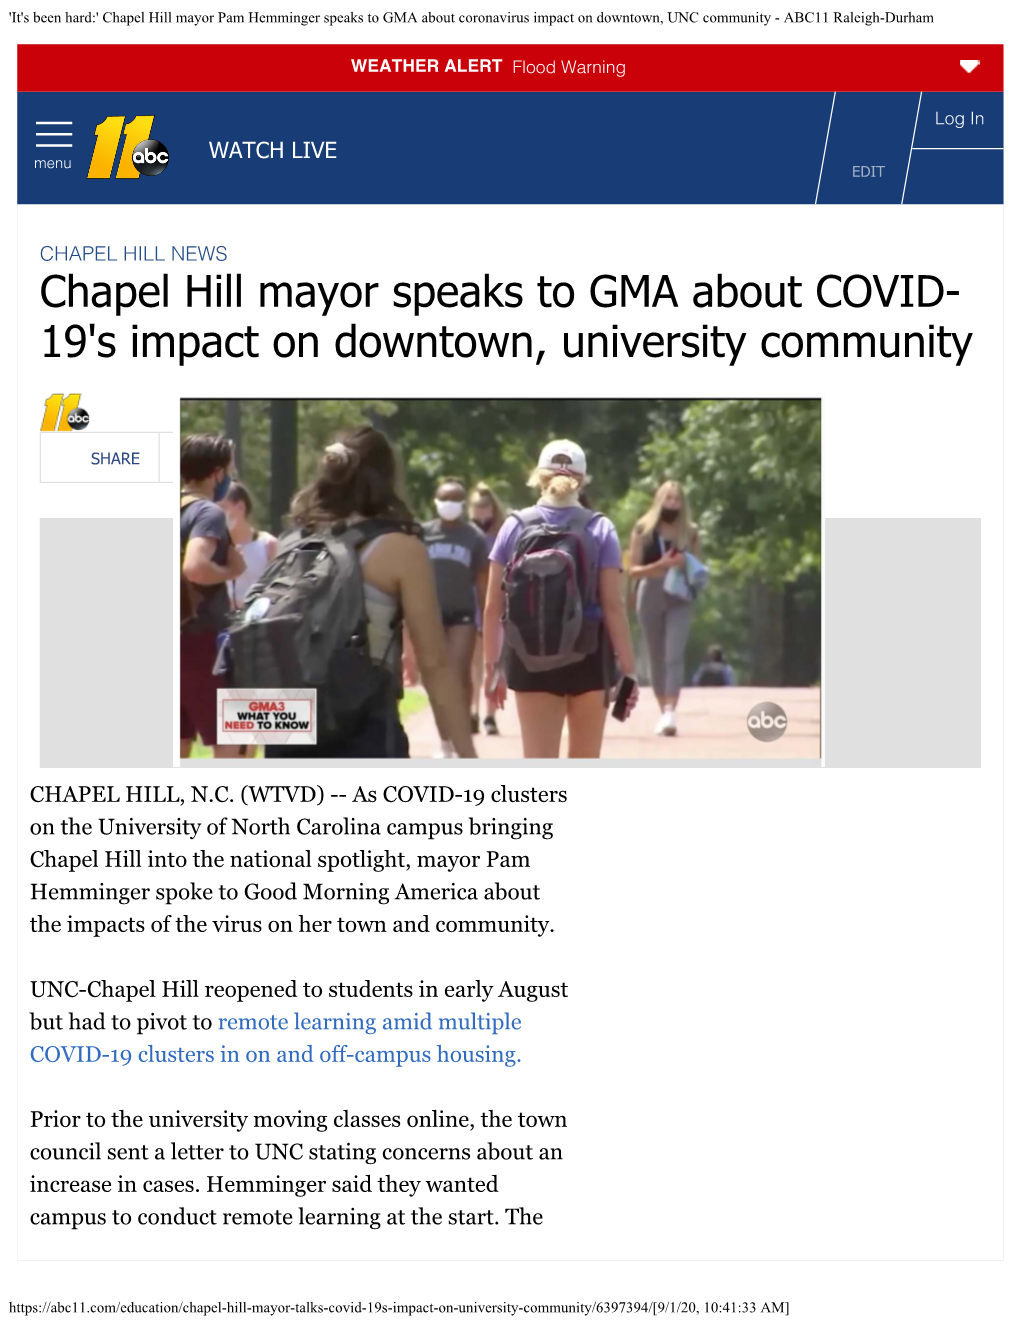 Chapel Hill Mayor Speaks to GMA About COVID- 19'S Impact on Downtown, University Community